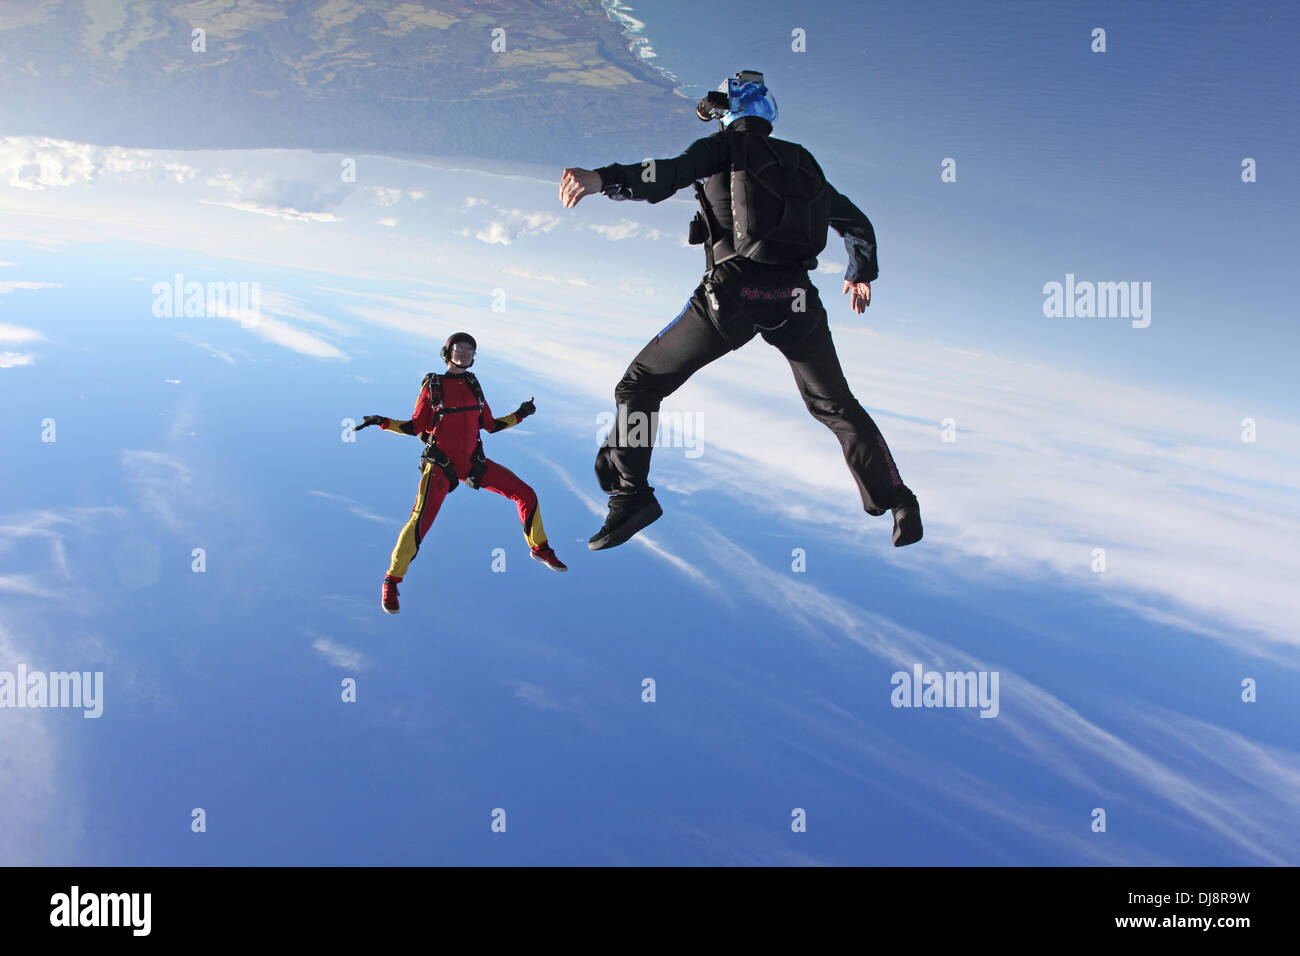 These freefly skydivers are flying head over with high speed (over 135 MPH). They have fun playing together in the blue sky. Stock Photo